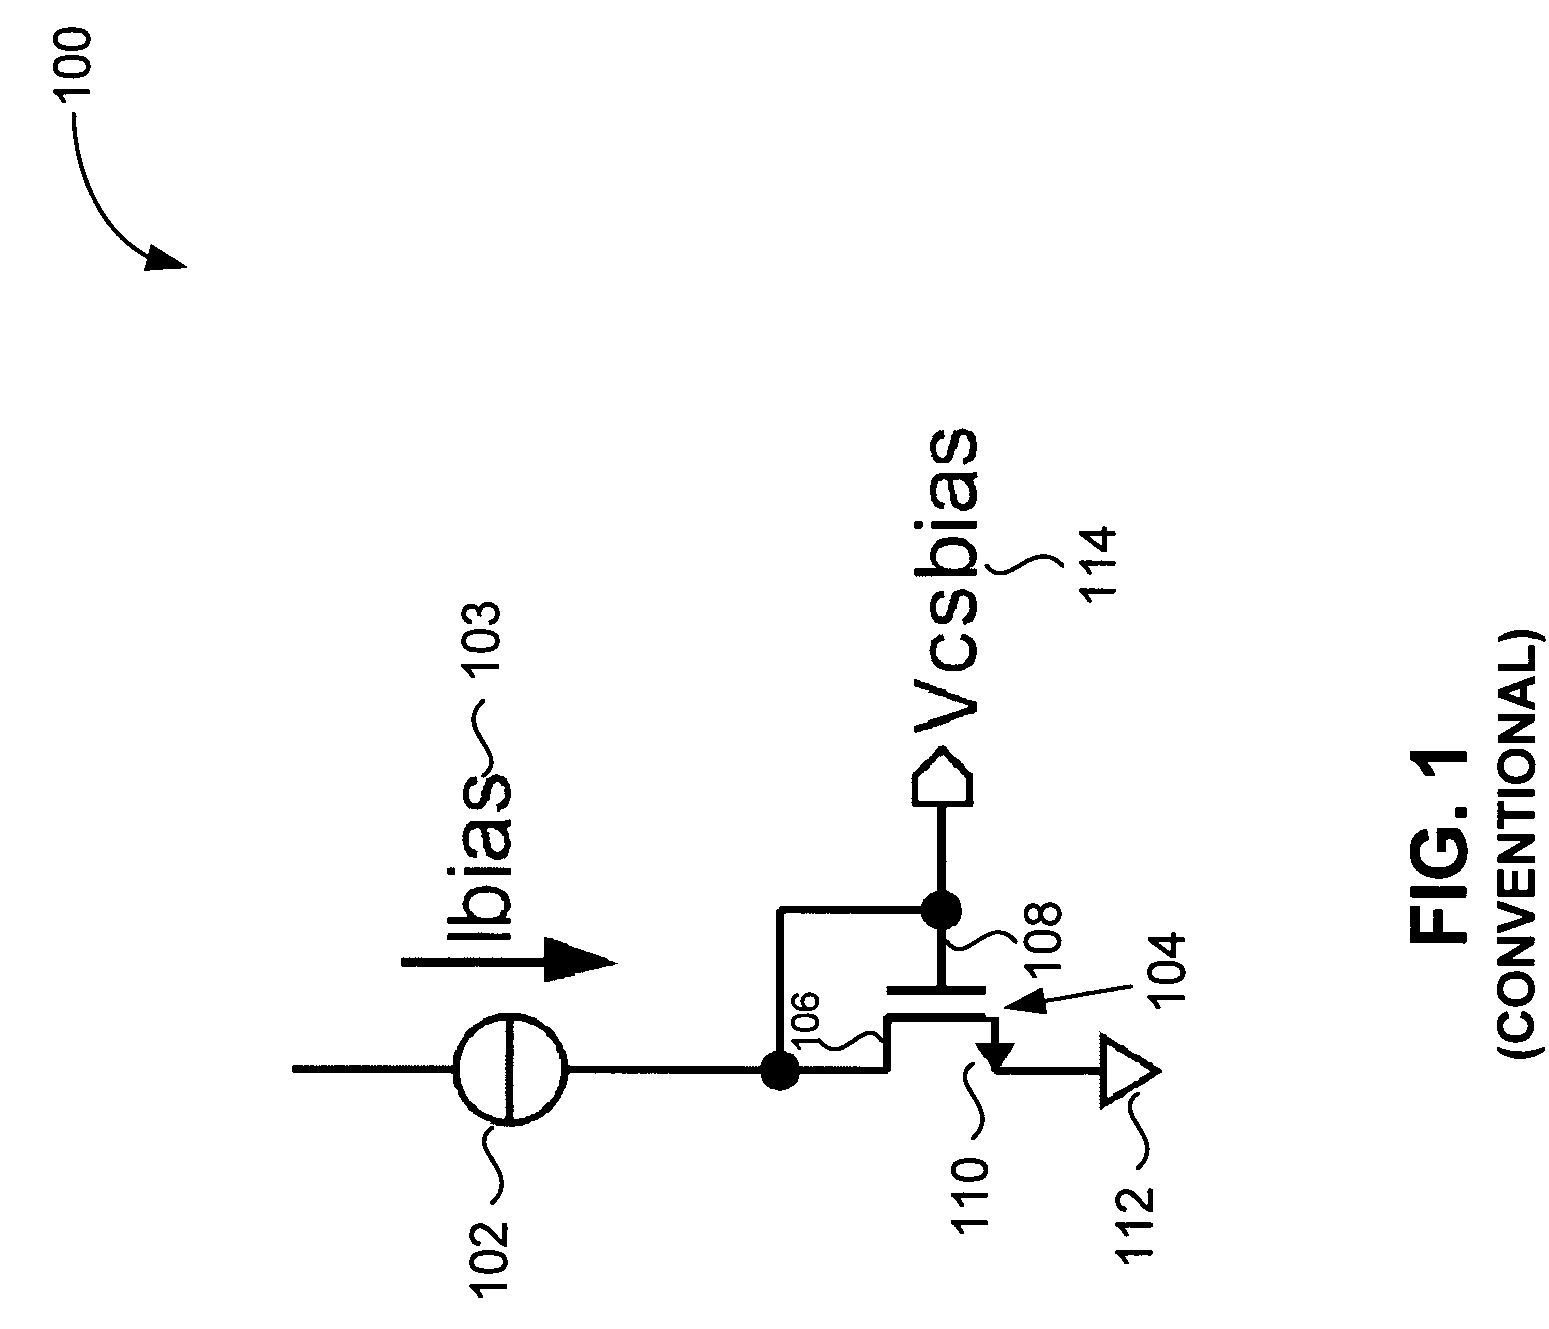 Digital-to-analog converter with programmable current control